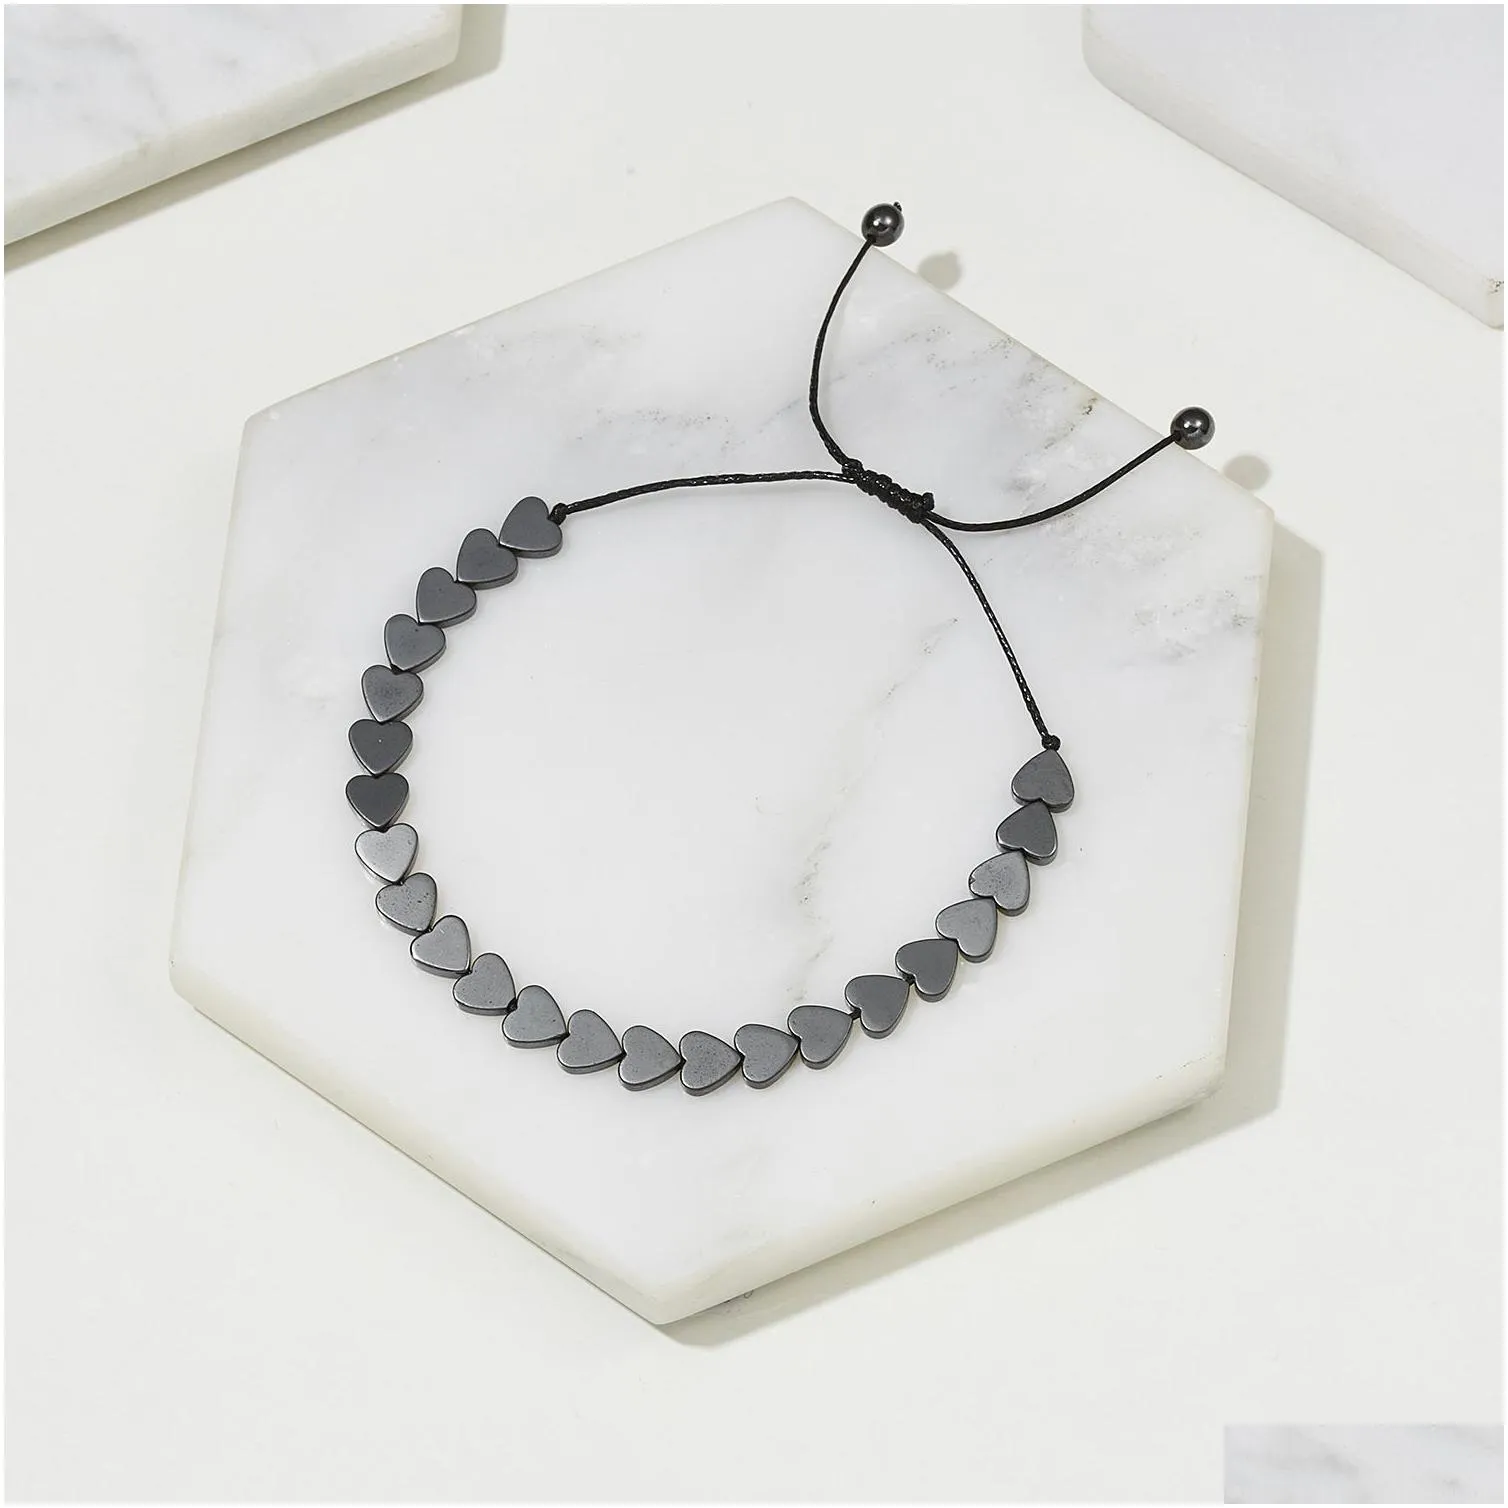 magnetic therapy health care loss weight effective black stone bracelets slimming stimulating acupoints arthritis pain relief